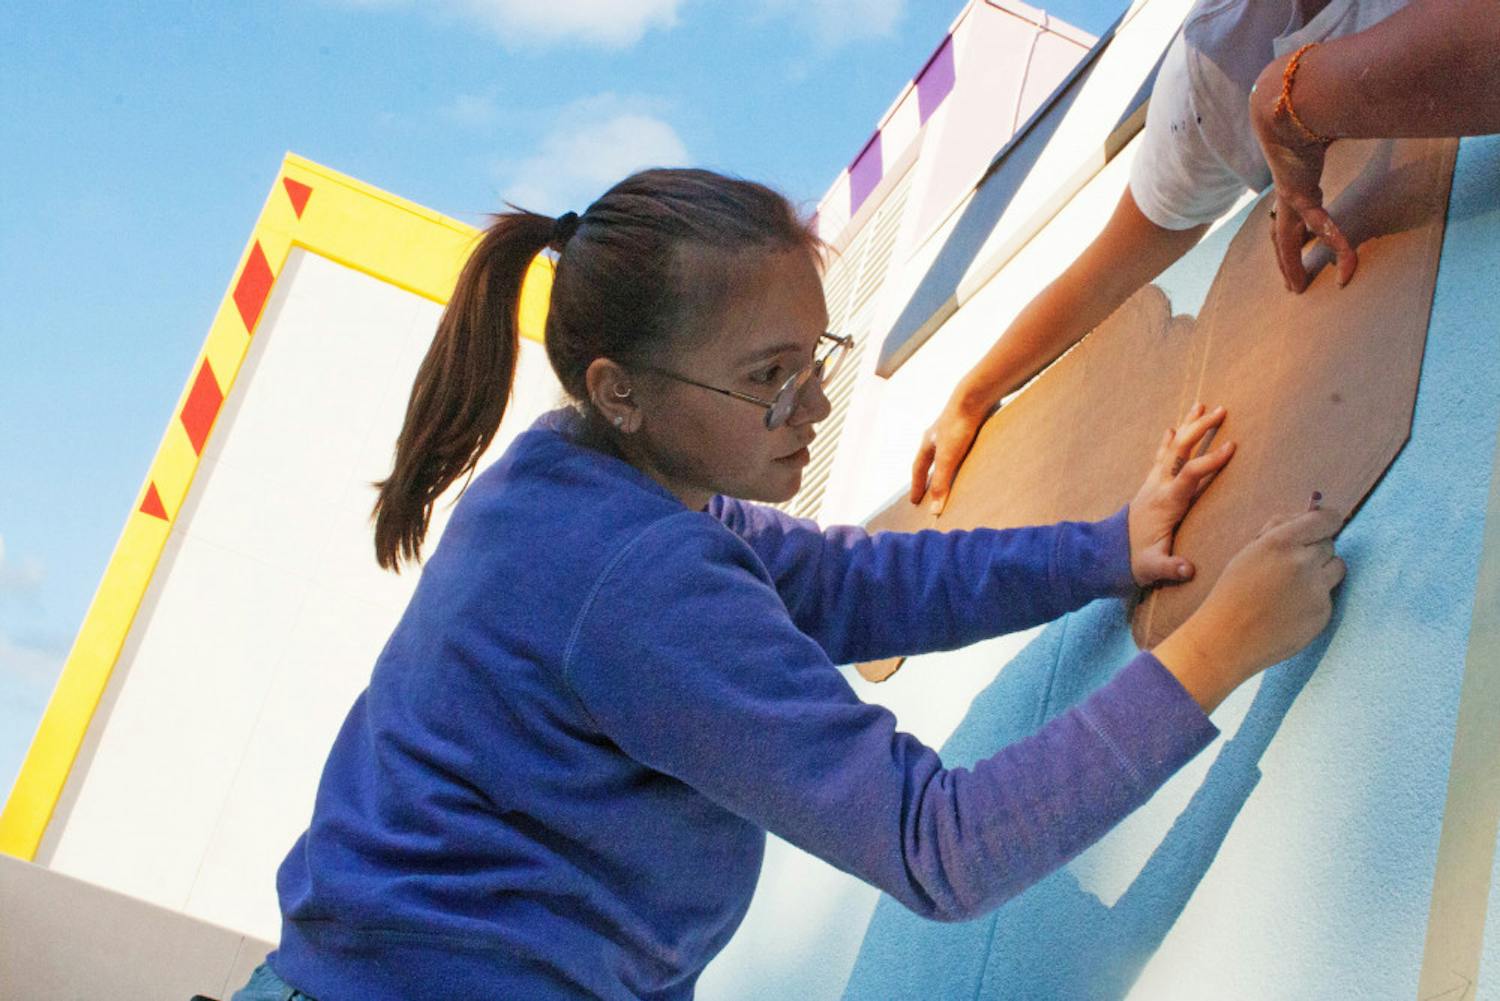 Jovana Christiani, a 19-year-old Santa Fe College illustration sophomore, outlines the new mural on Santa Fe’s walls Tuesday. The mural is set to be finished Saturday.